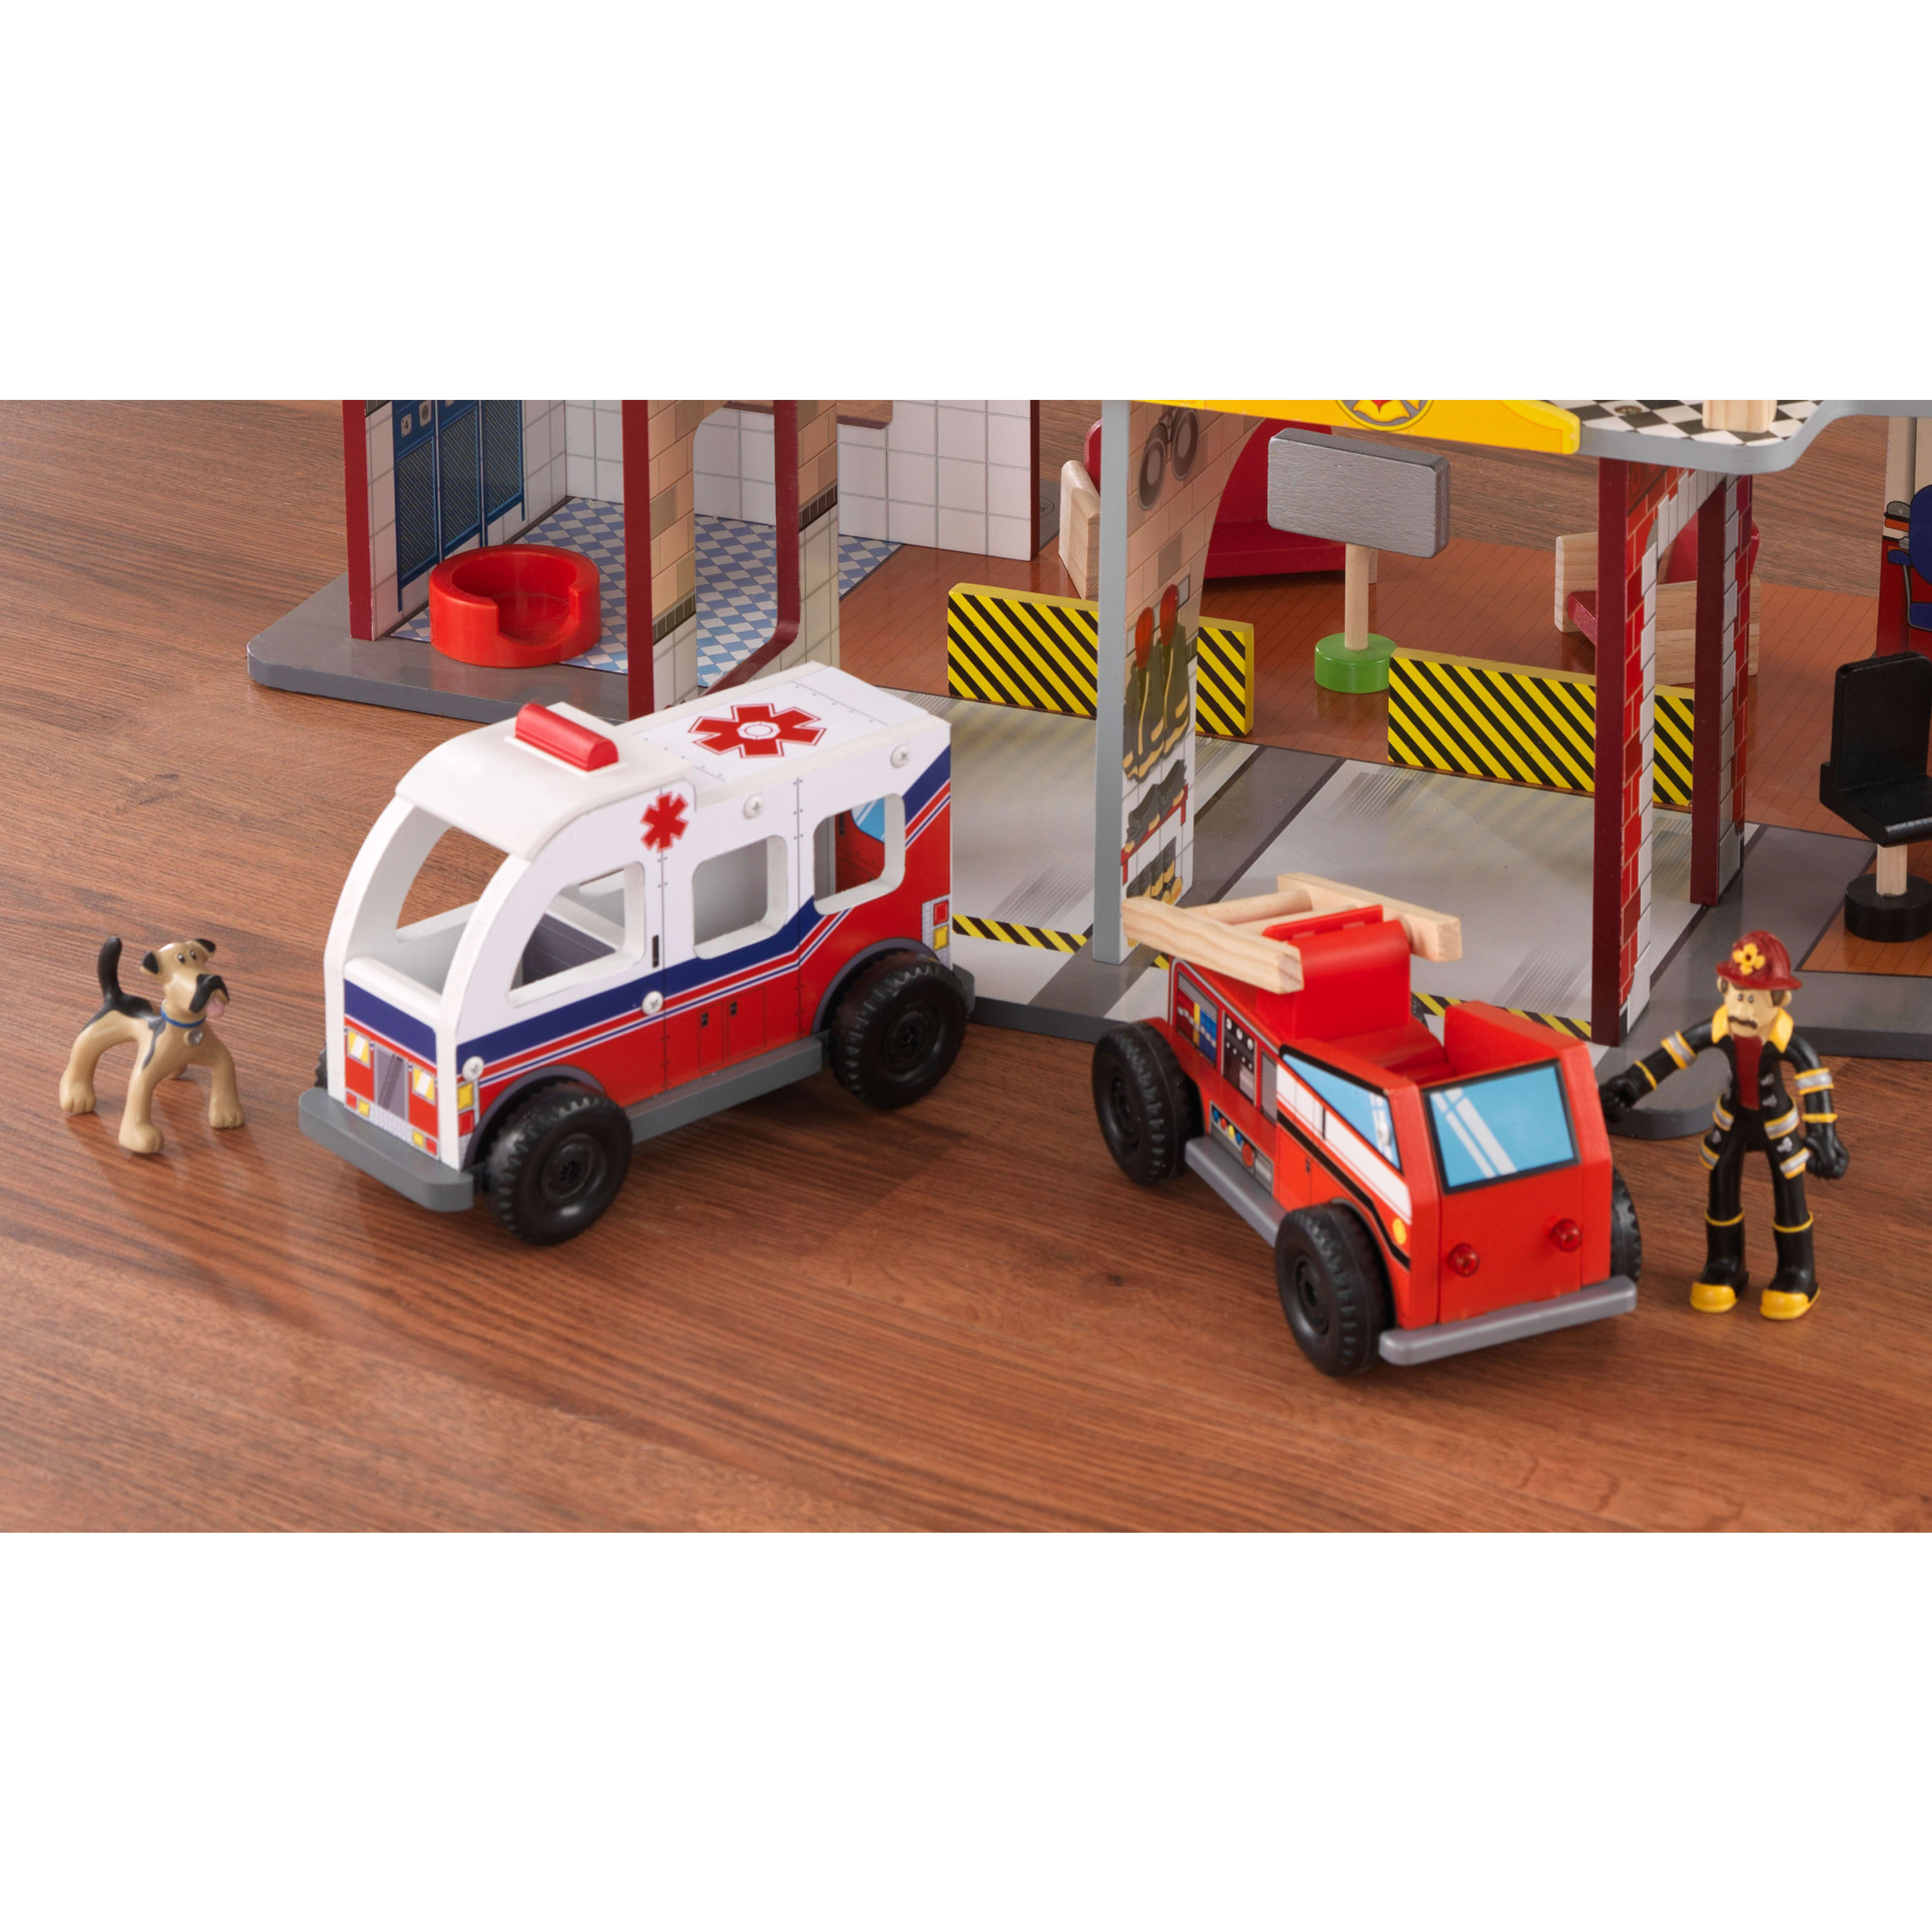 KidKraft Deluxe Wood Rescue Play Set with Ambulance, Fire Truck, Helicopter & 27 Pieces - image 6 of 7